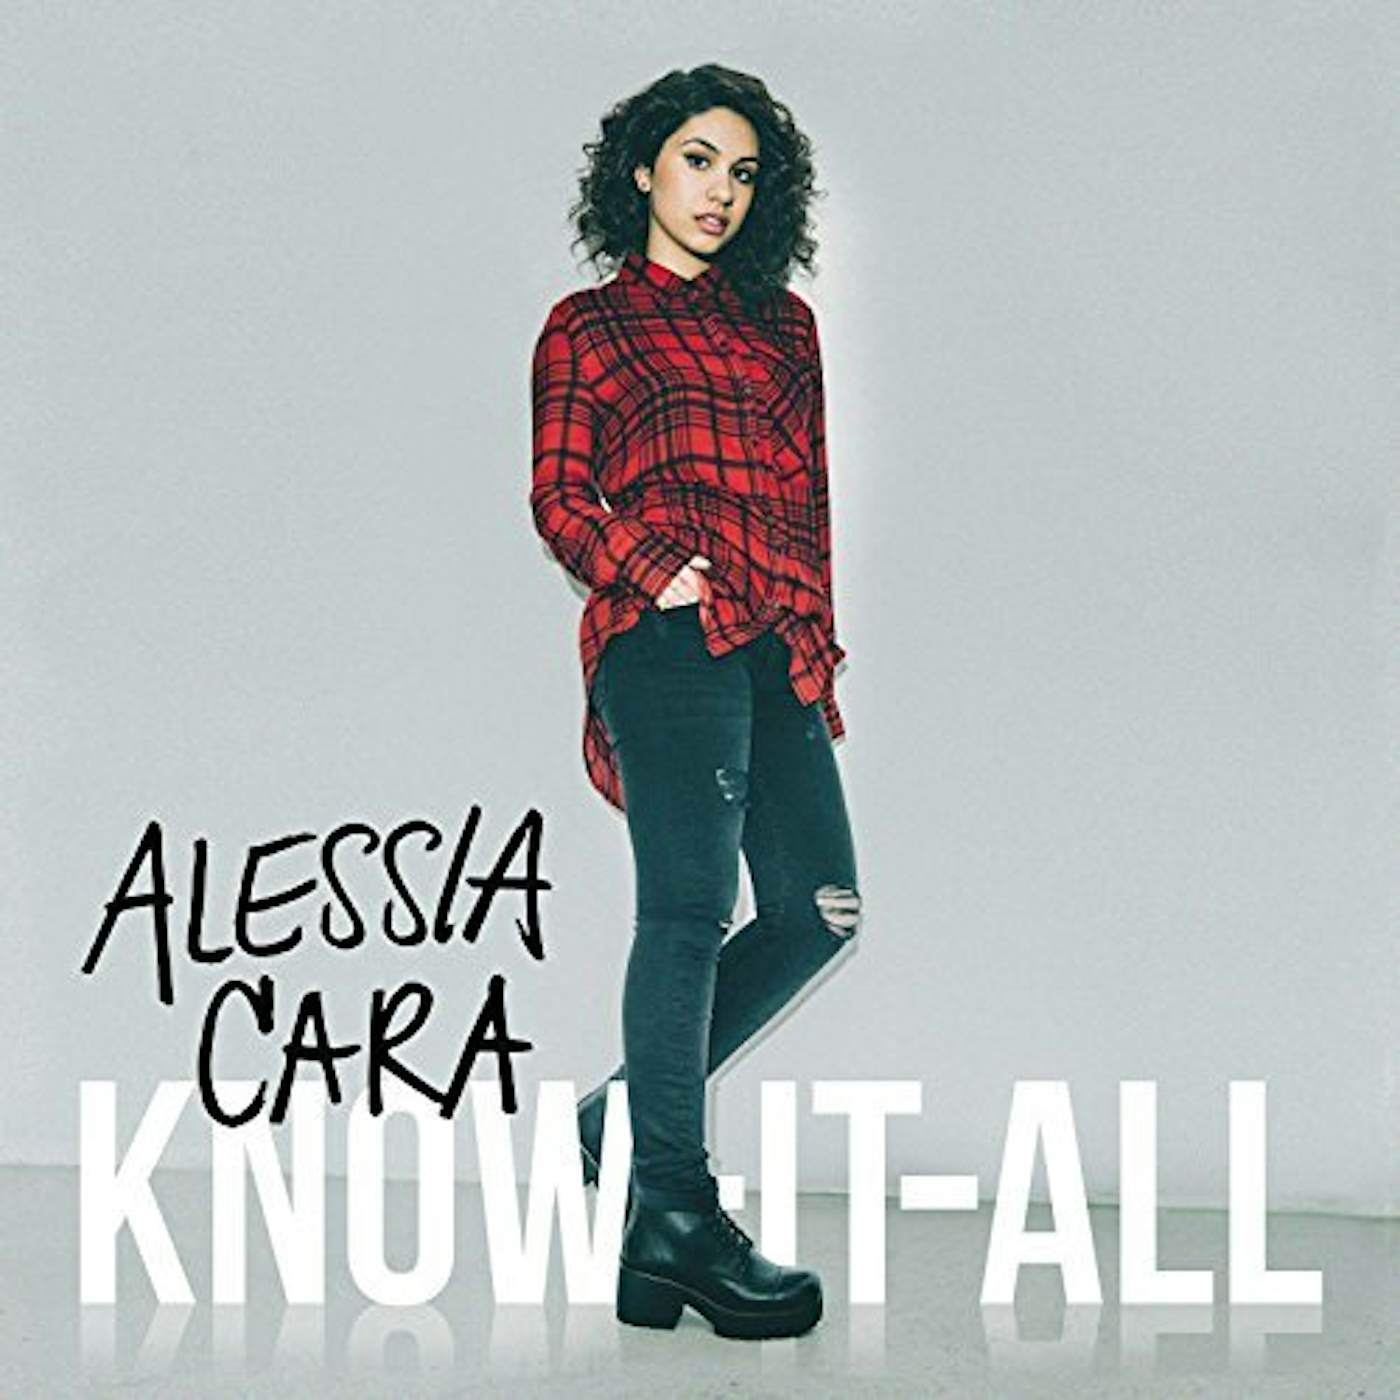 Alessia Cara KNOW-IT-ALL CD